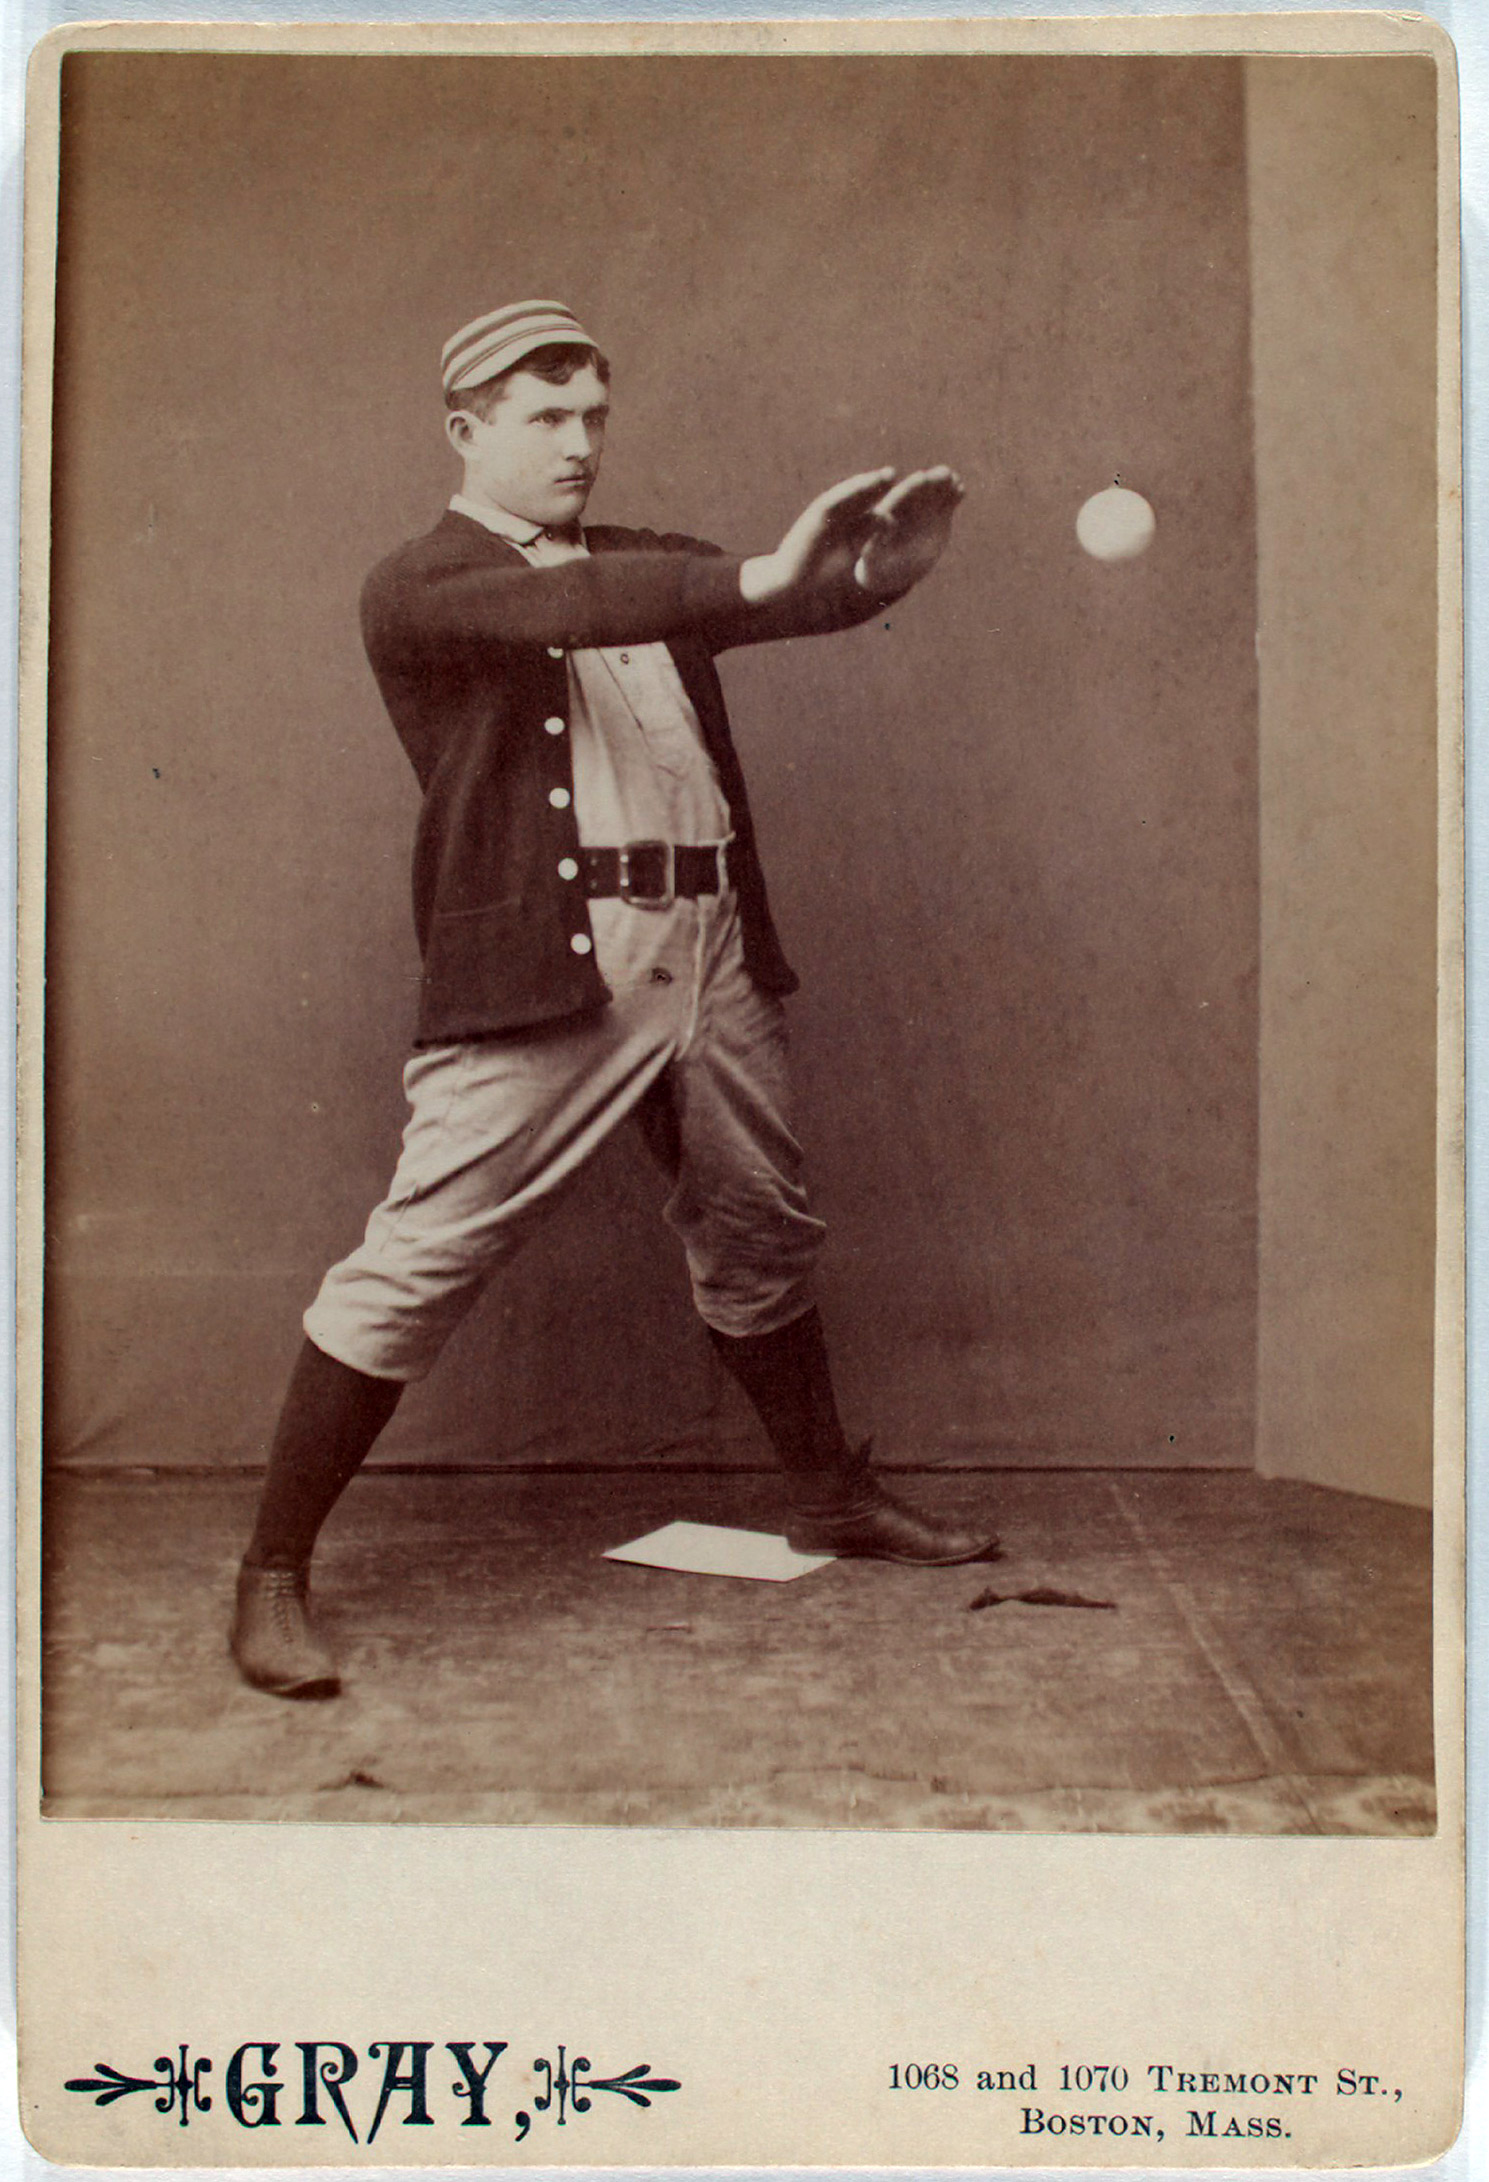 Vintage baseball photographs from the A.G. Spalding Baseball Collection